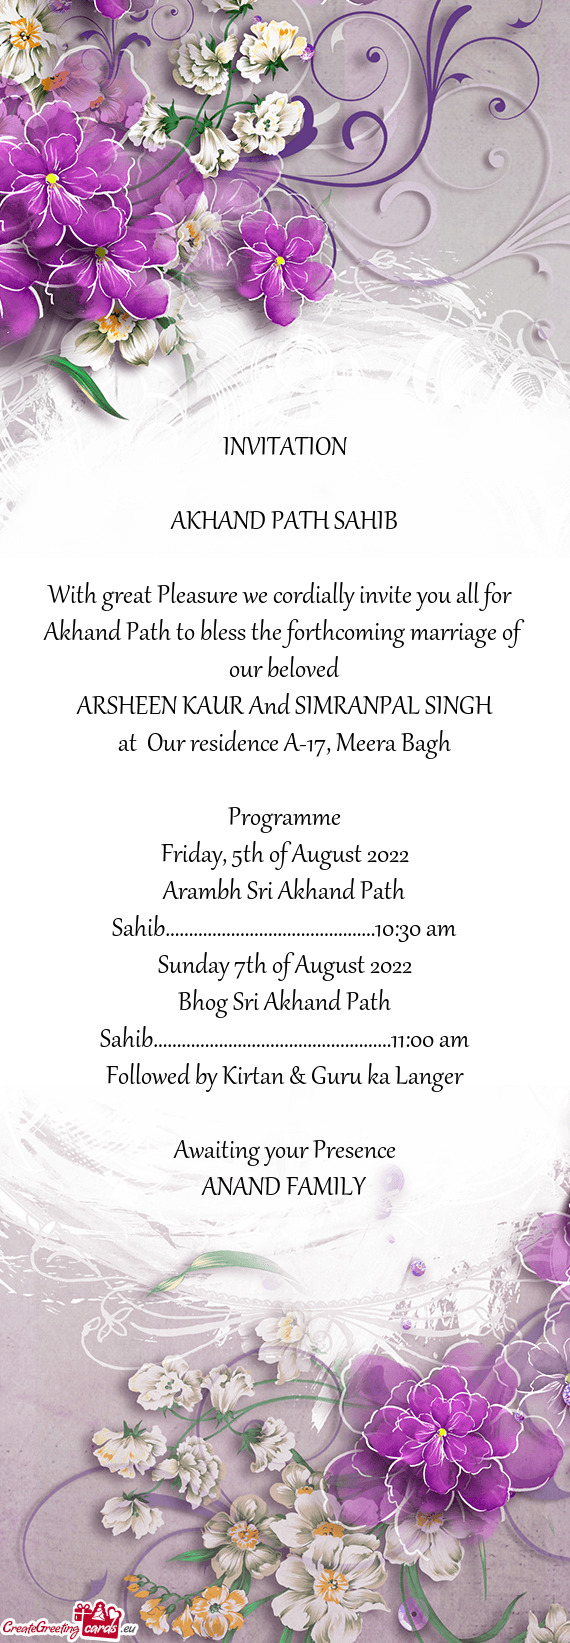 Akhand Path to bless the forthcoming marriage of our beloved